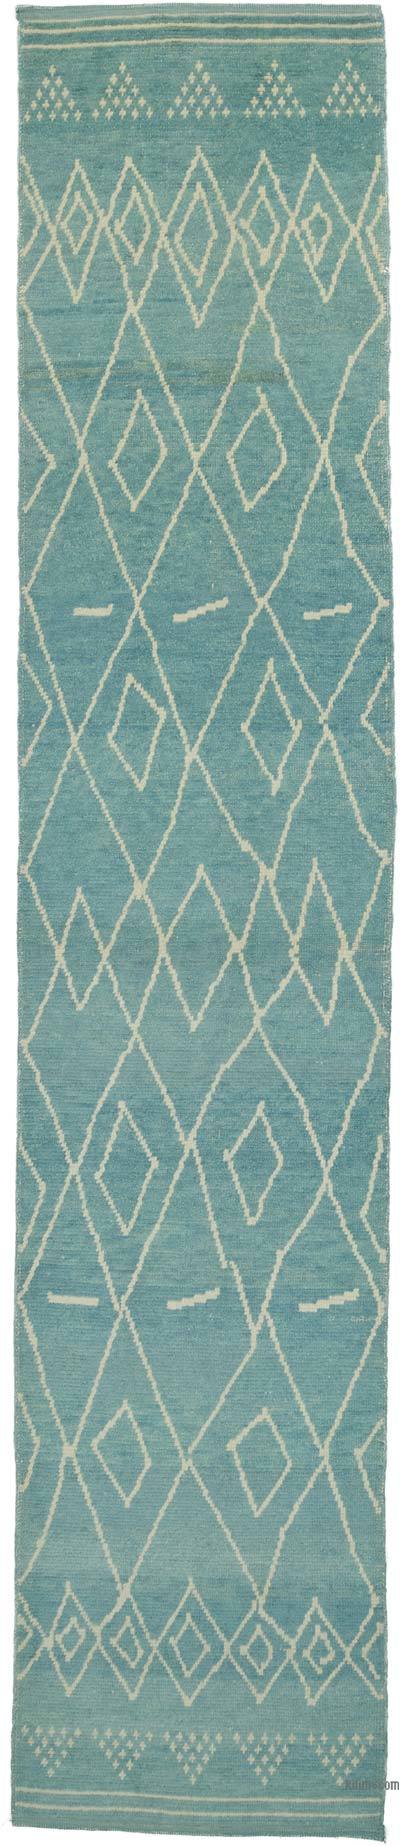 New Moroccan Style Hand-Knotted Runner - 2' 11" x 14' 7" (35 in. x 175 in.)